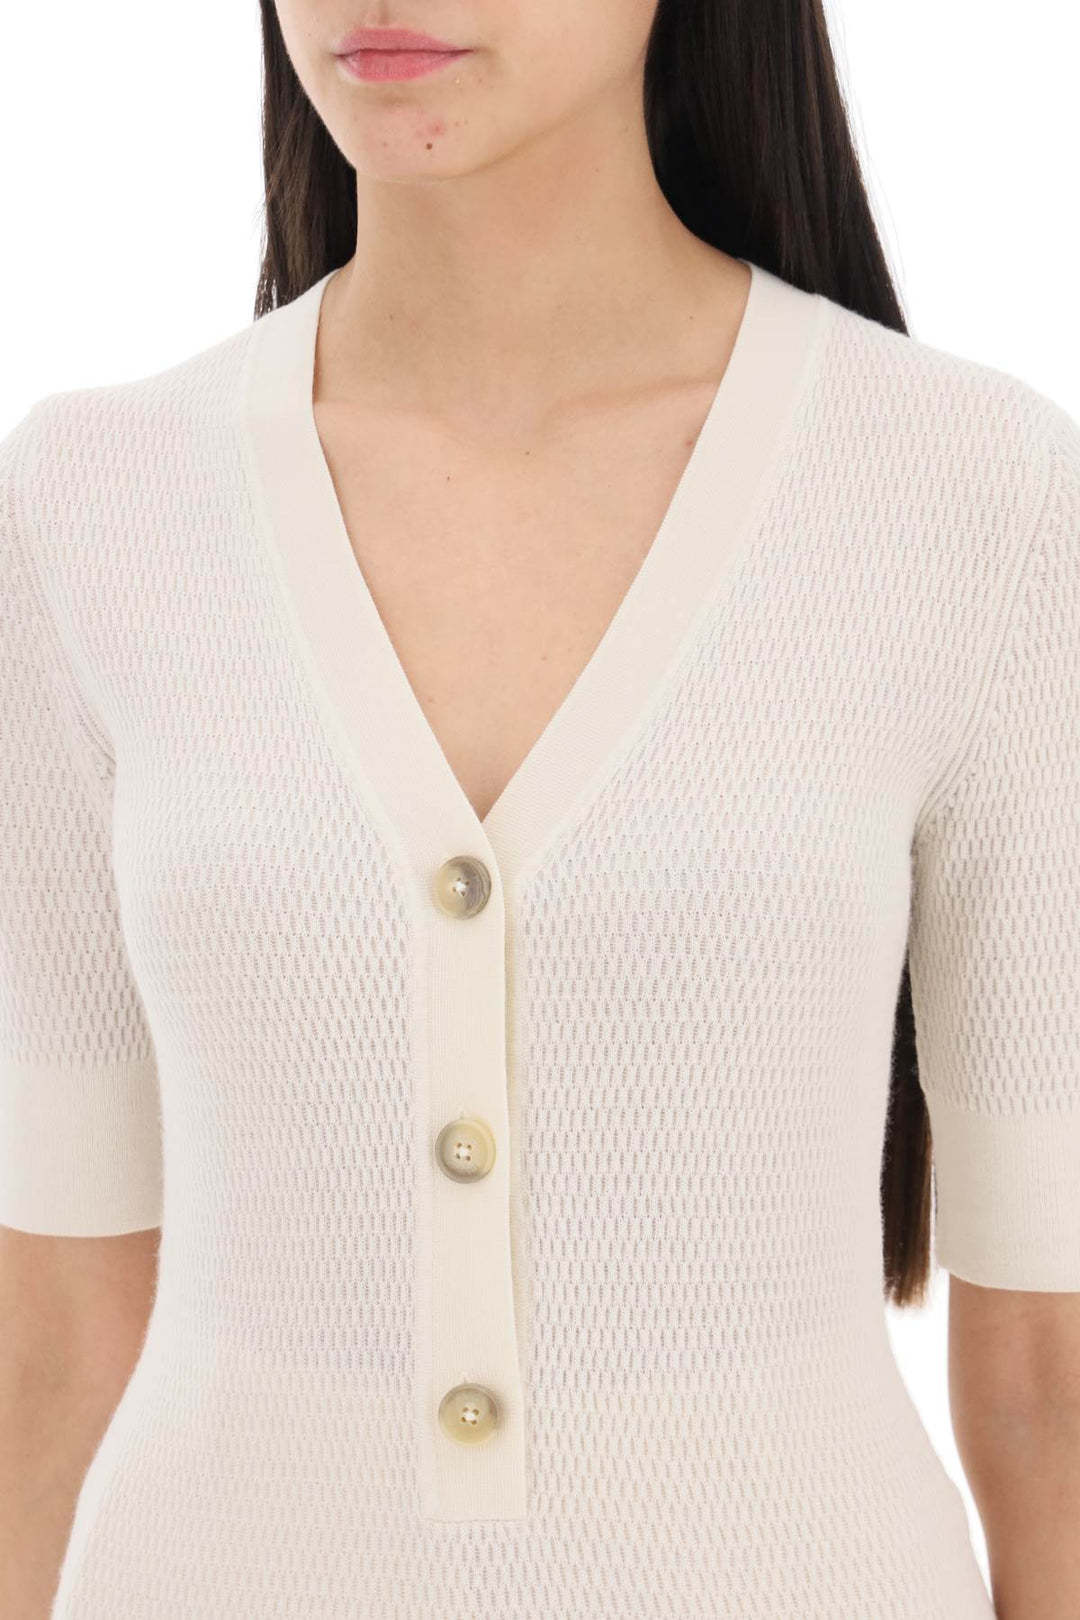 Closed Knitted Top With Short Sleeves   White